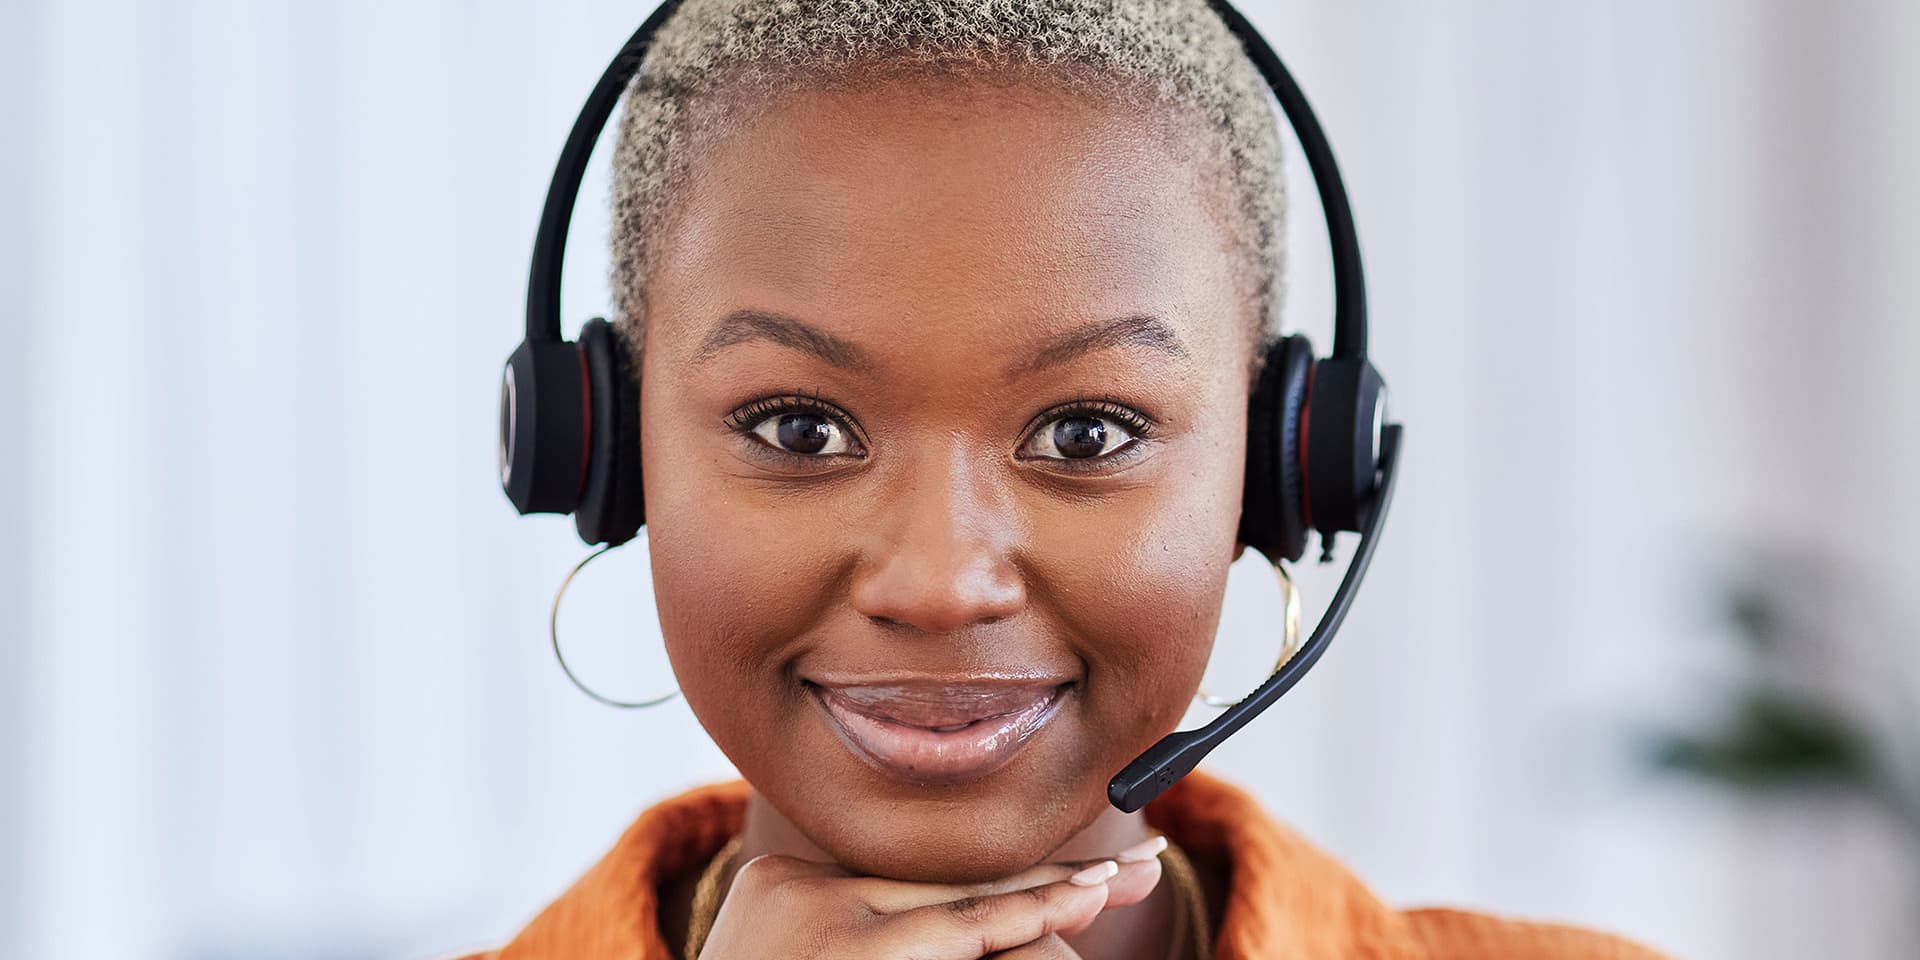 Young woman sitting wearing a headset and her hands on her chin, smiling.